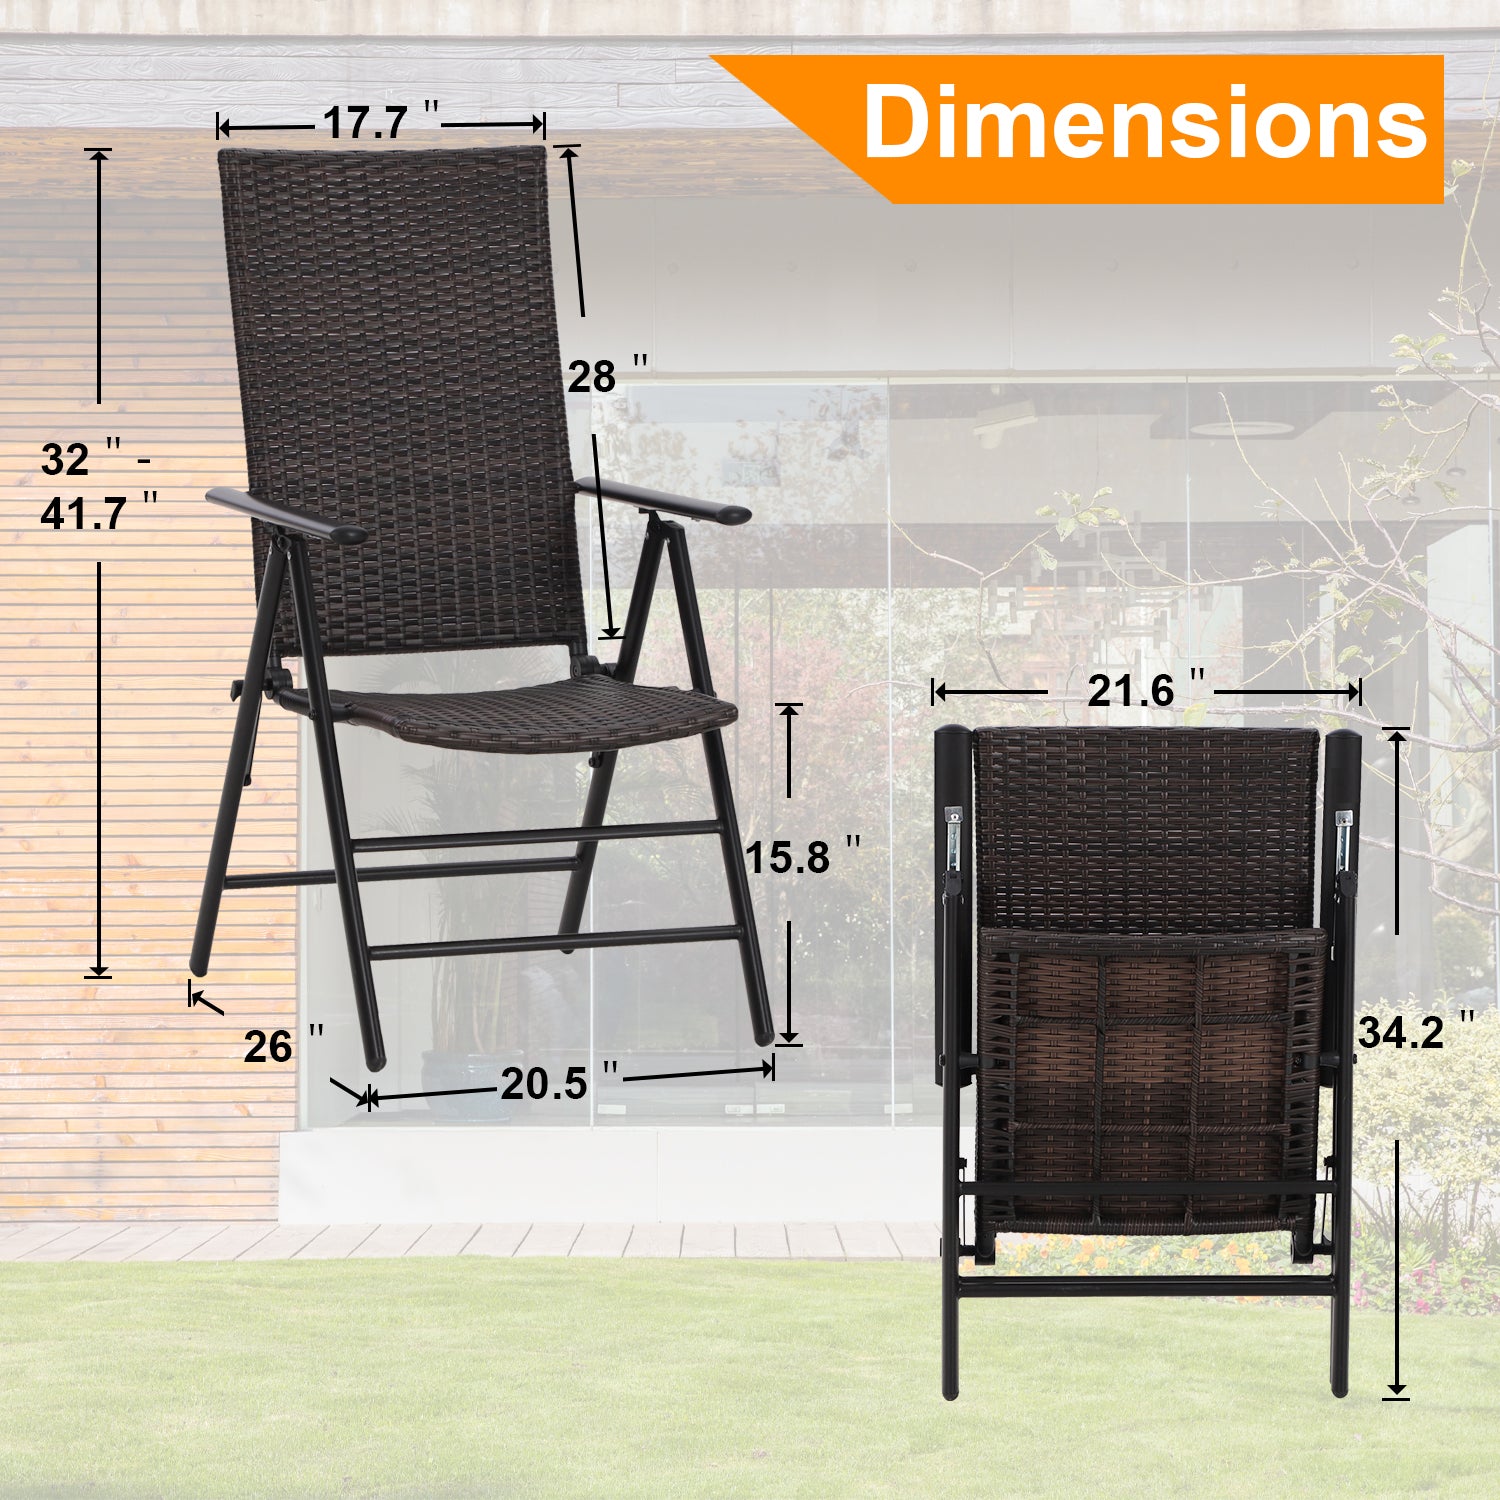 MFSTUDIO 5-Piece Wood-look Square Table & Rattan Adjustable Reclining Foldable Chairs Outdoor Dining Set